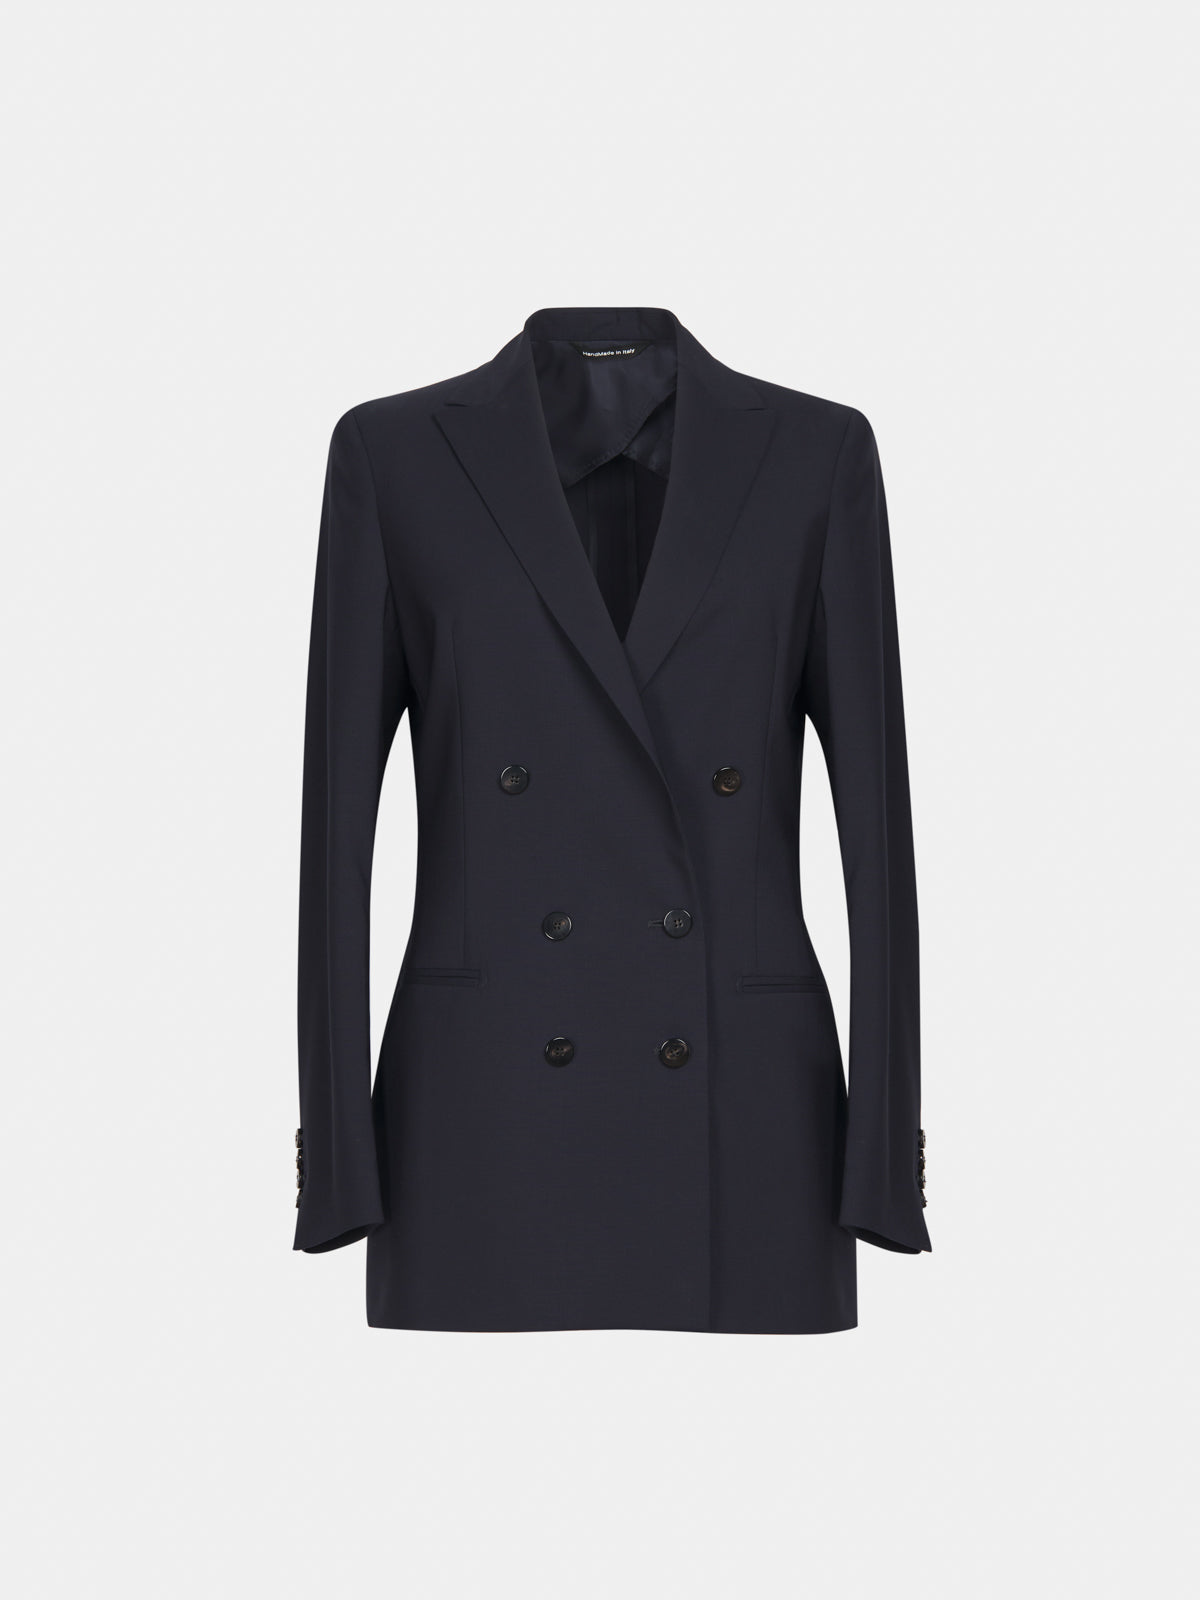 Iconic double-breasted jacket in cool navy blue wool